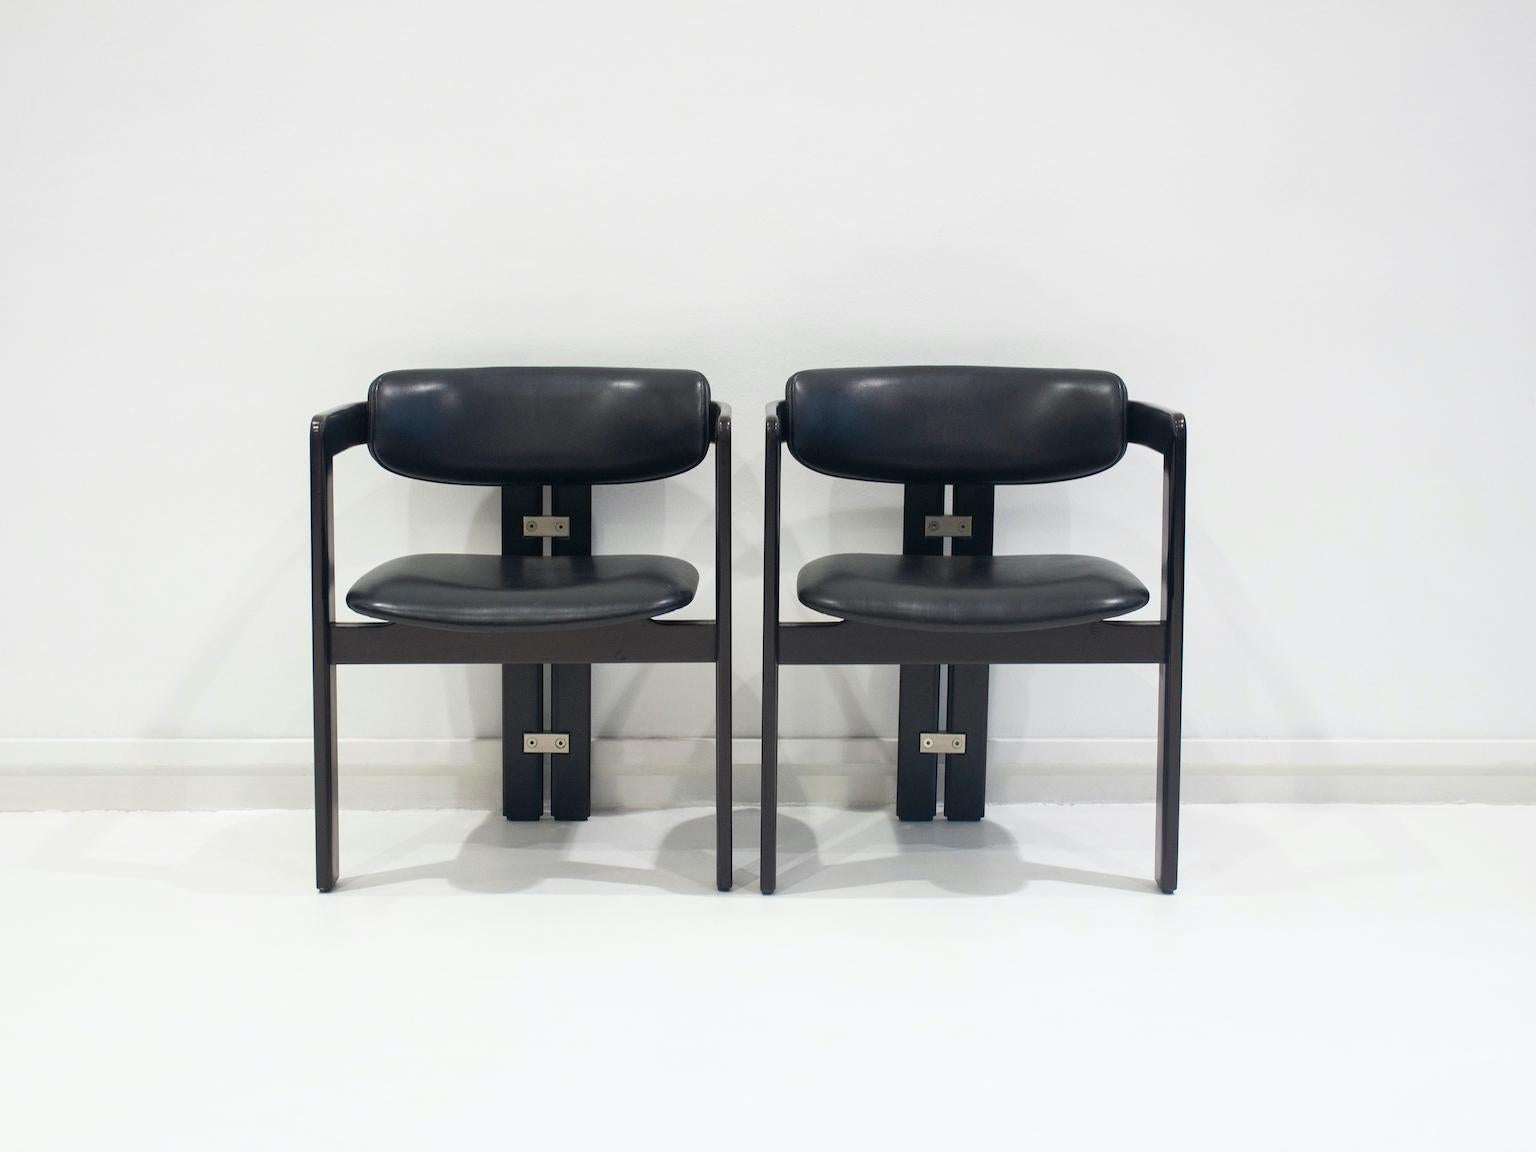 Pair of model 'Pamplona' chairs designed by Augusto Savini for Pozzi in 1965, Italy. The chairs are made of black lacquered wood with a rounded backrest, seat and back upholstered in black leather, rear chair legs braced with aluminum elements.